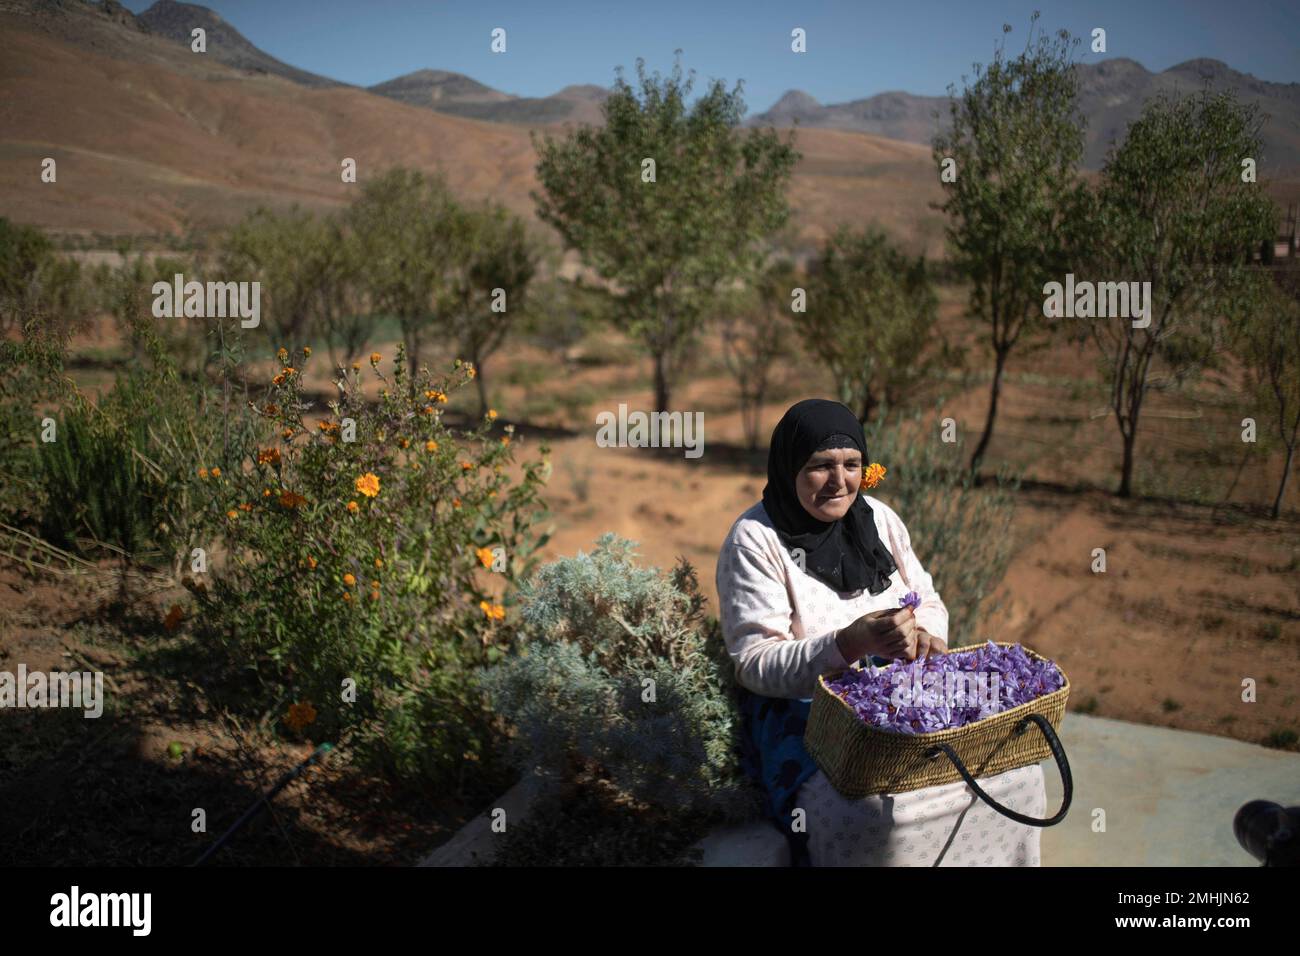 In this Tuesday, Nov. 5, 2019 photo, Fatima Aït Tahadousht, 50, displays a basket of freshly collected Saffron flowers during harvest season in Askaoun, a small village near Taliouine, in Morocco's Middle Atlas Mountains. The saffron plants bloom for only two weeks a year and the flowers, each containing three crimson stigmas, become useless if they blossom, putting pressure on the women to work quickly and steadily. (AP Photo/Mosa'ab Elshamy) Stock Photo